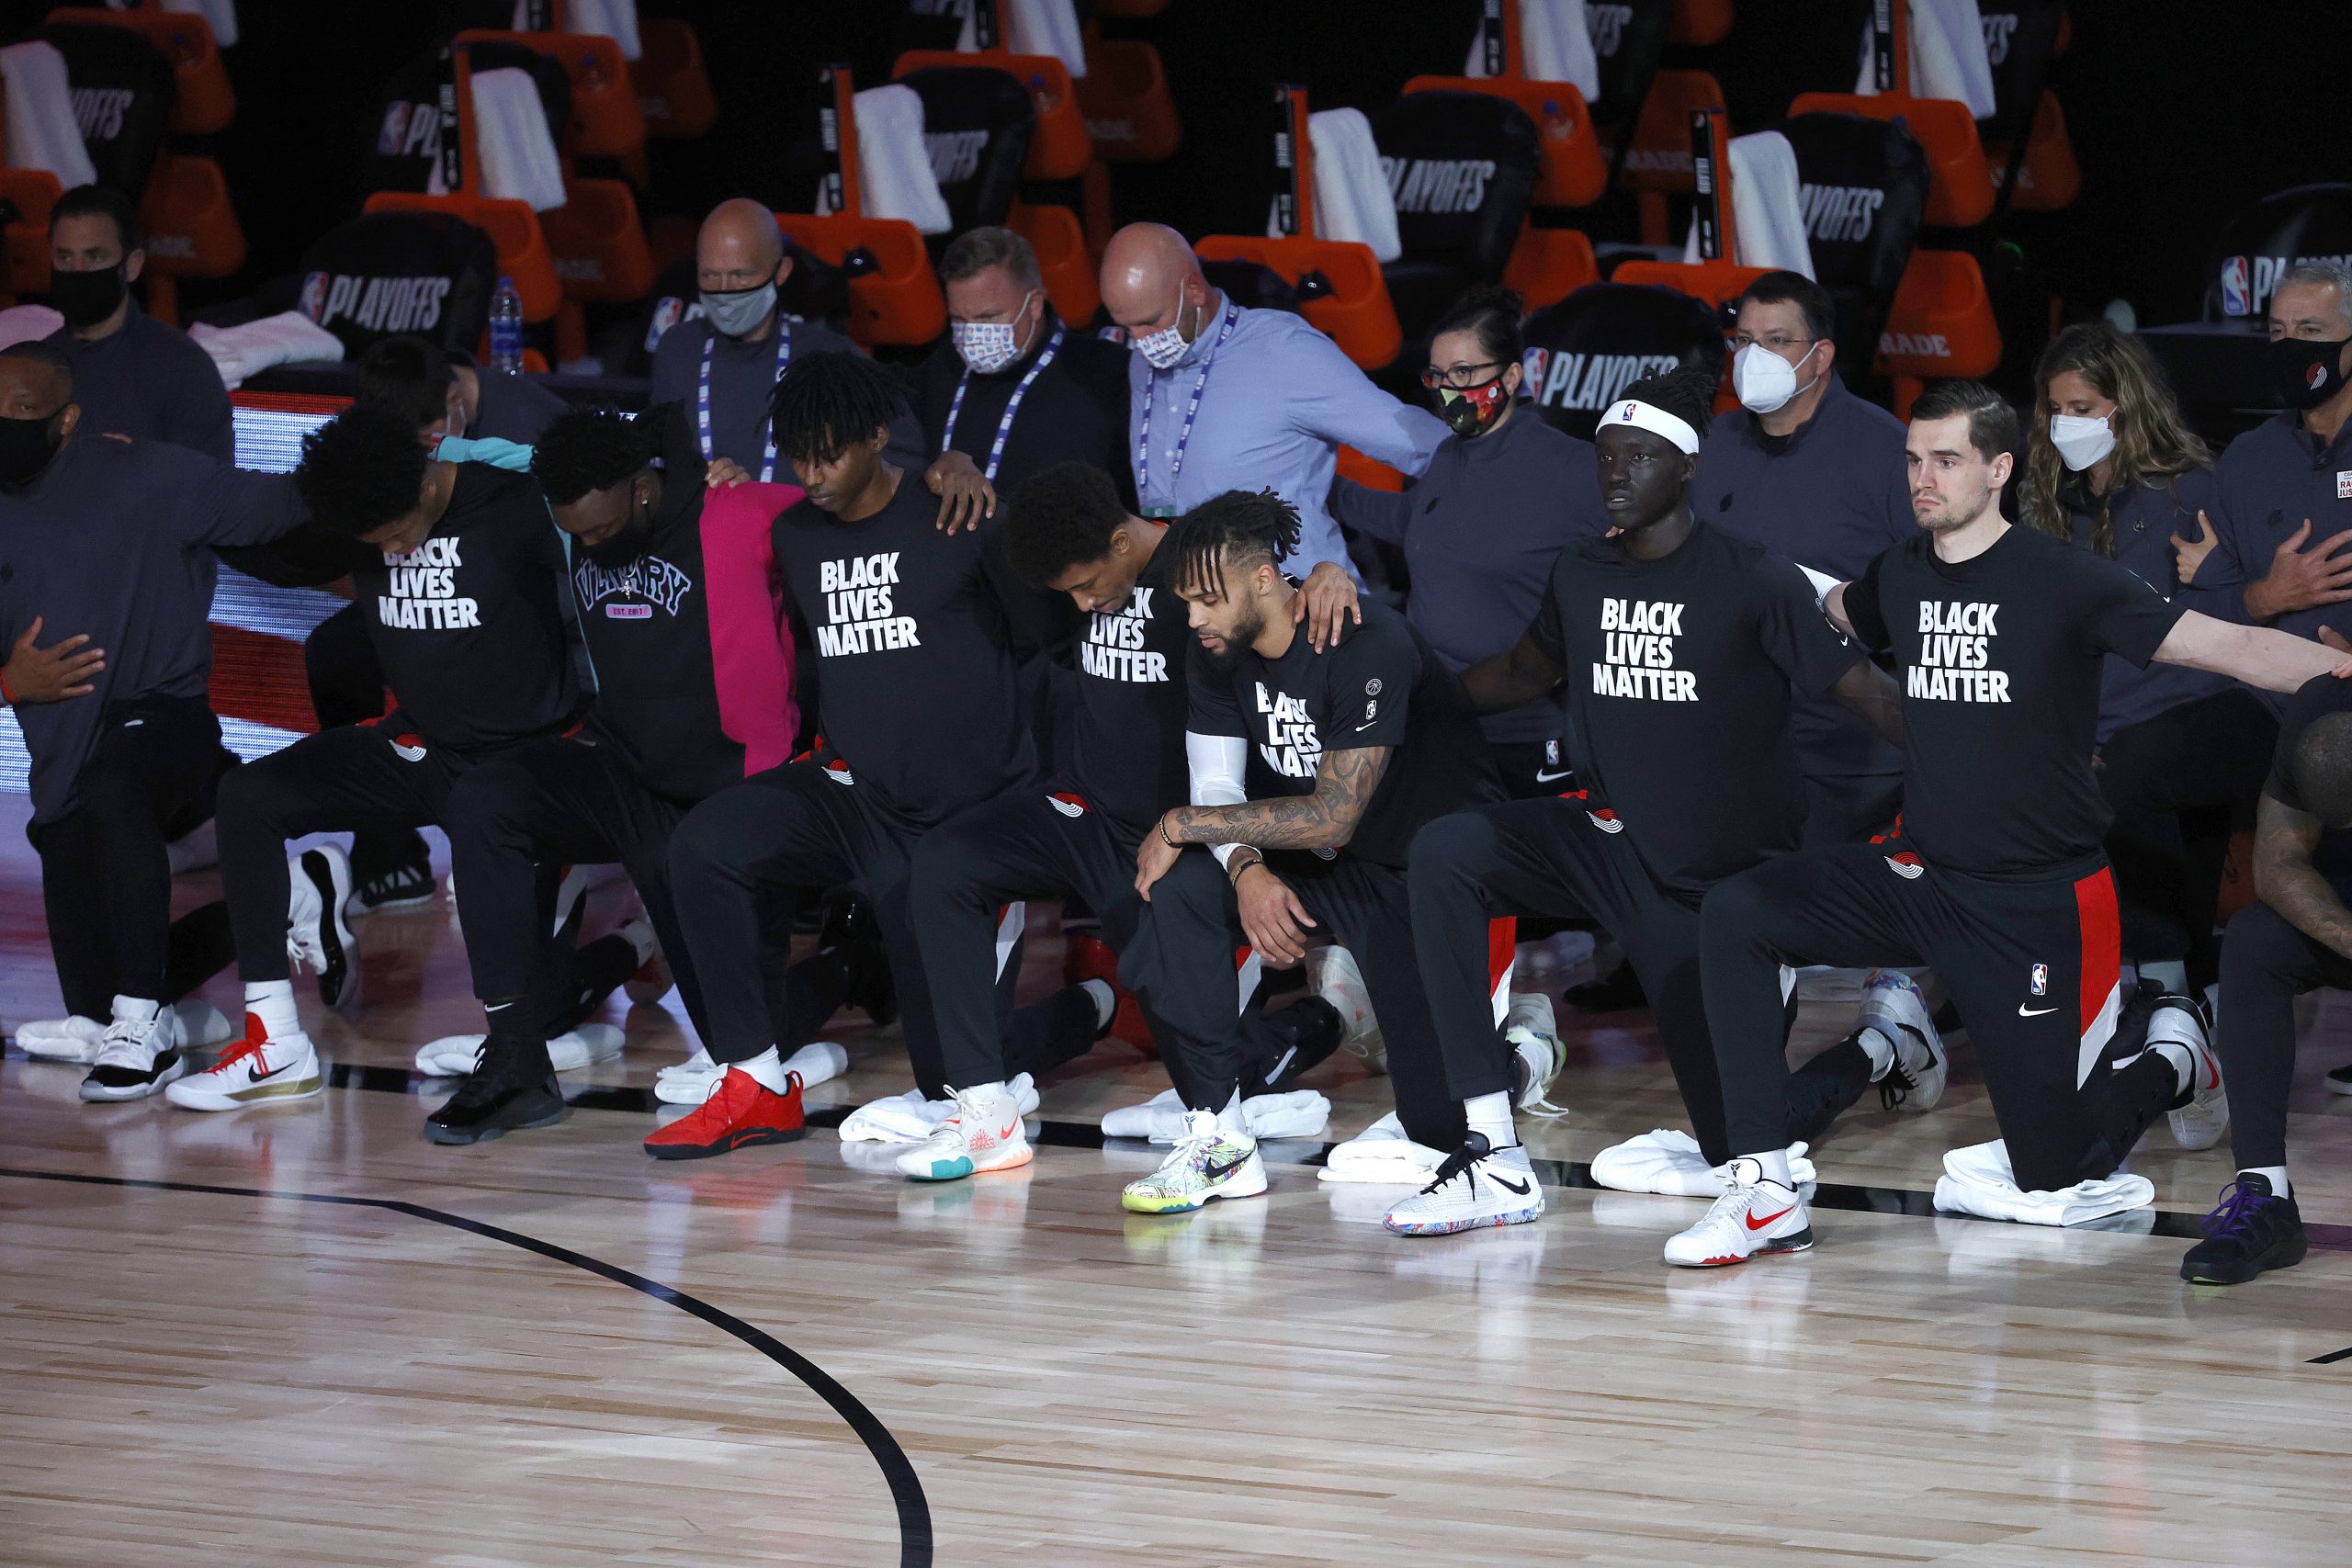 epa08623570 The Portland Trail Blazers take a knee during the national anthem before their NBA basketball first-round playoff game four against the Los Angeles Lakers at the ESPN Wide World of Sports Complex in Kissimmee, Florida, USA, 24 August 2020.  EPA/JOHN G. MABANGLO  SHUTTERSTOCK OUT